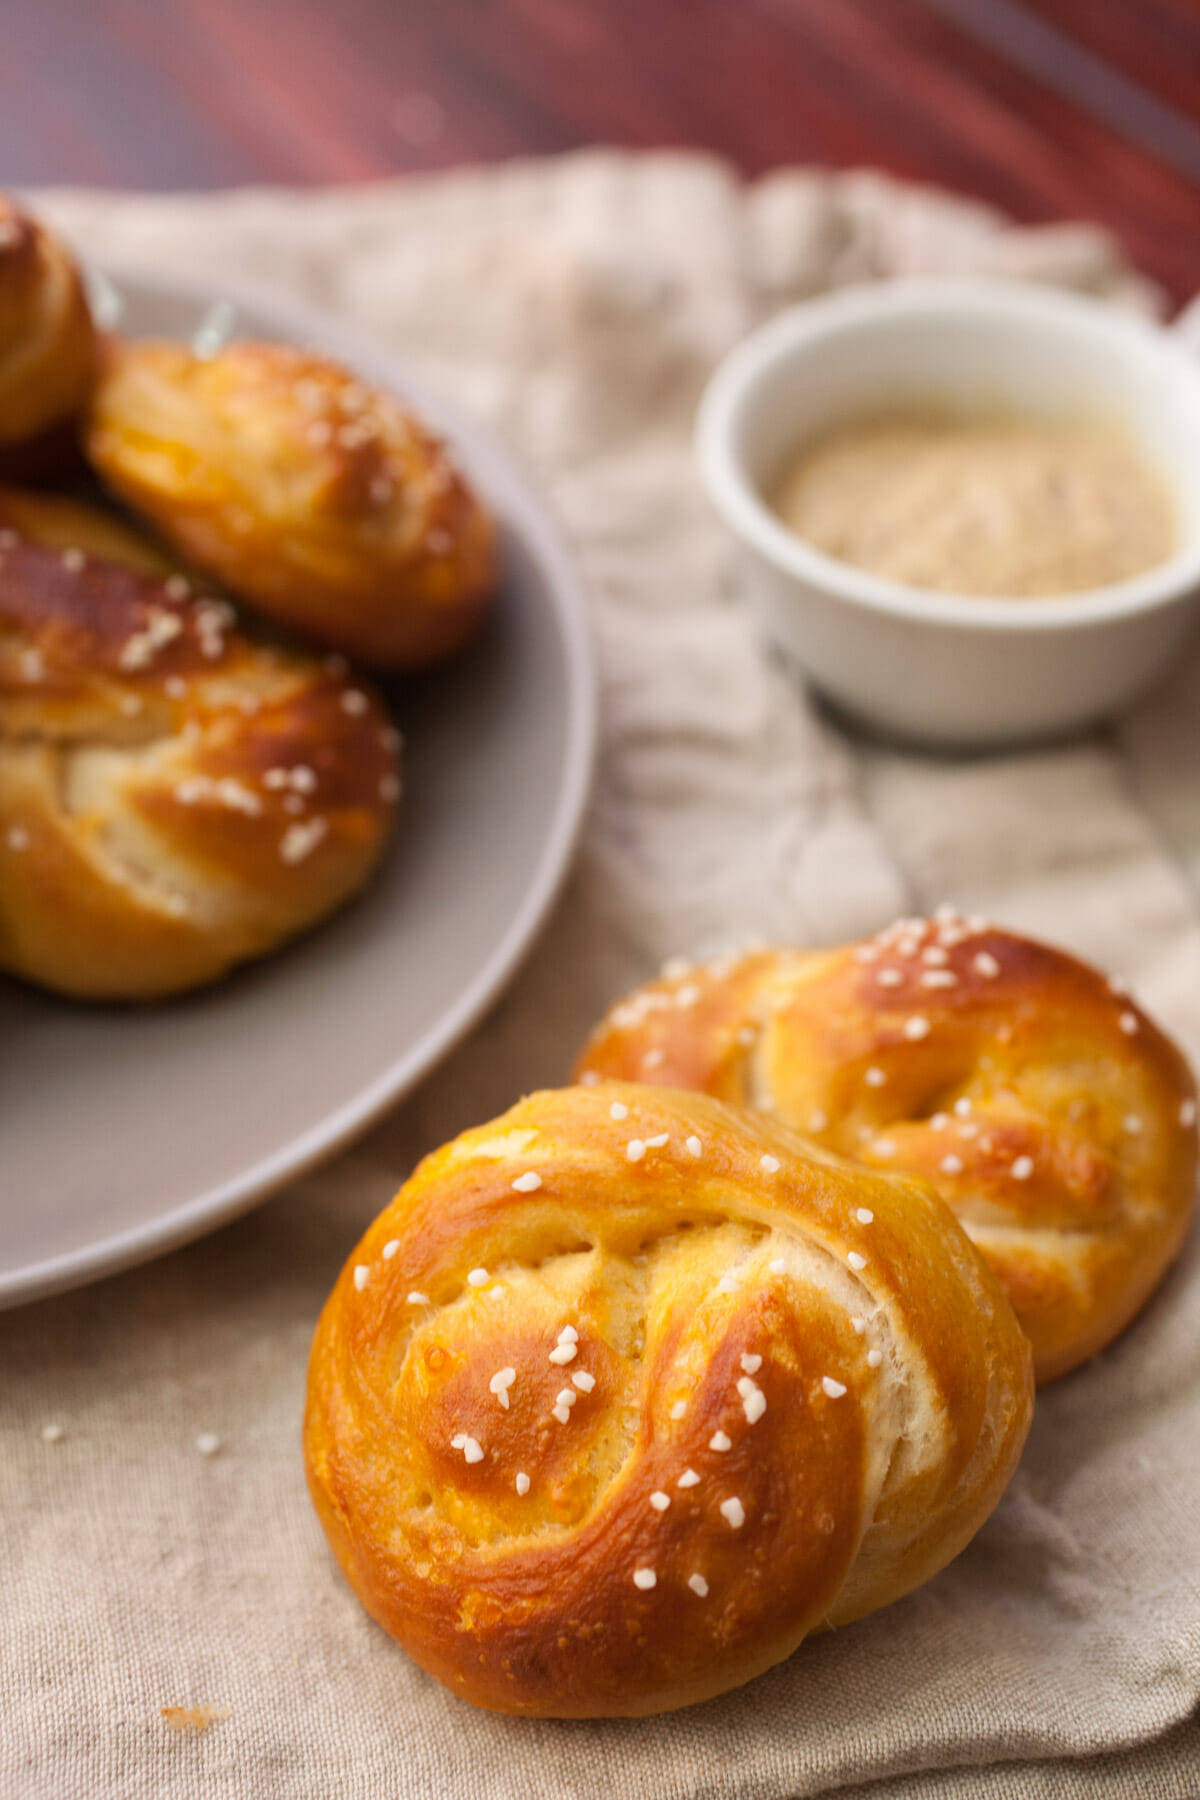 Roasted Garlic Cheddar Pretzel Knots: Perfect little pretzel knots with roasted garlic and cheddar blended into the dough. Such a great appetizer. Who doesn't love homemade fresh soft pretzels?! | macheesmo.com